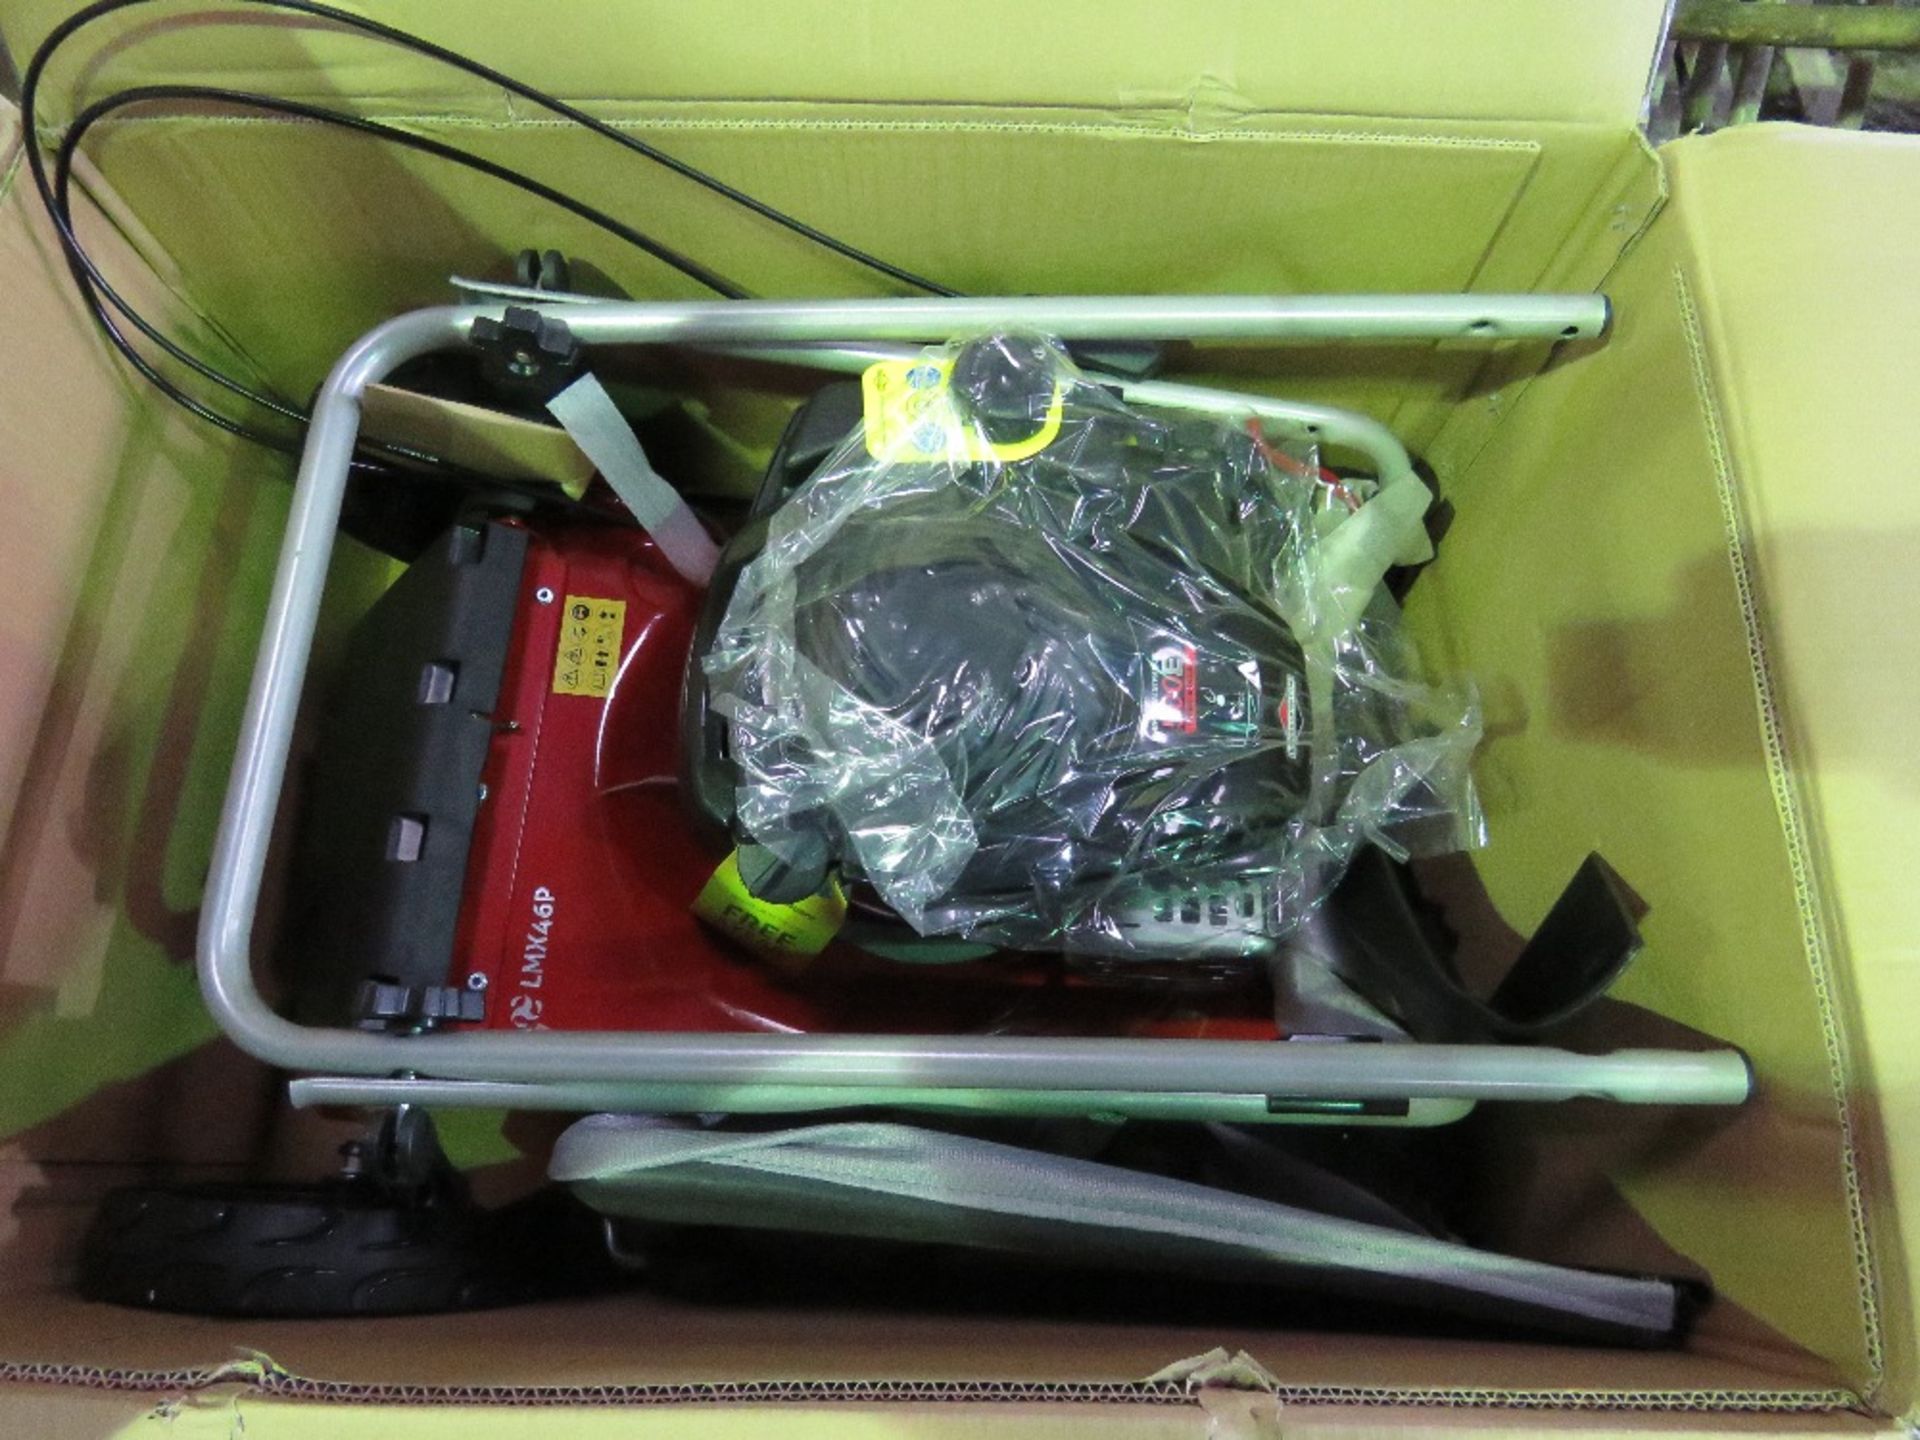 GARDENCARE LMX46 LAWNMOWER. BOXED, UNUSED, DIRECT FROM LOCAL COMPANY BEING SURPLUS STOCK. - Image 2 of 4